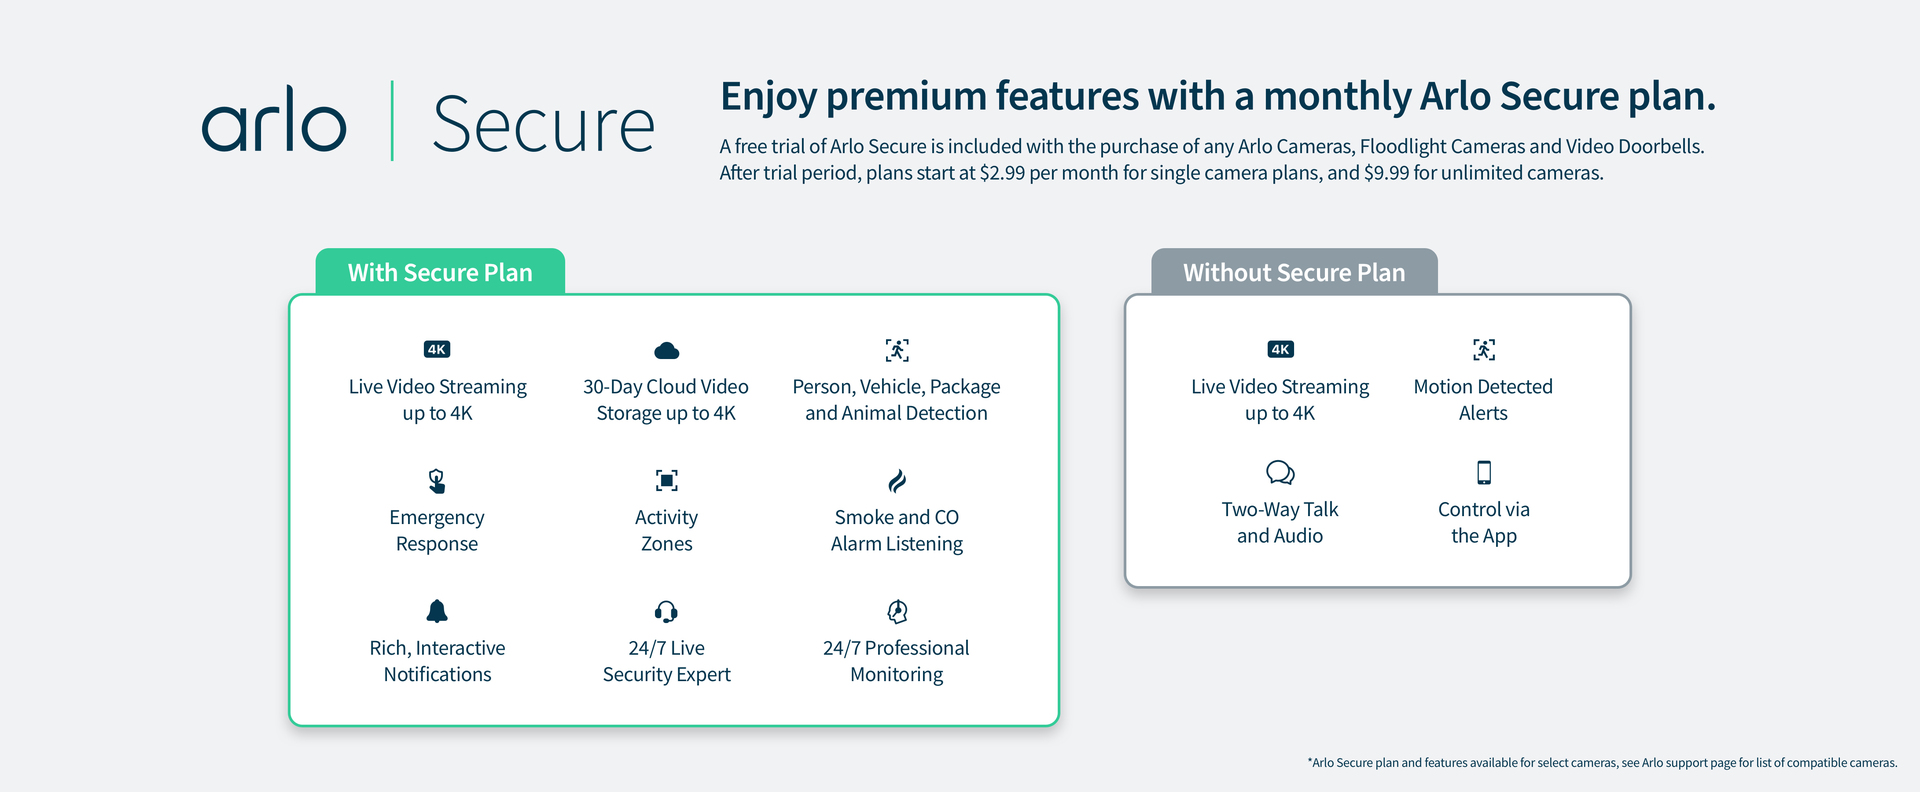 Enjoy premium features with a monthly Arlo Secure plan. Trial of an Arlo Secure plan is included with the purchase of any Arlo Cameras, Floodlights, and Video Doorbells. After trial, plans start at $2.99 per month for a single camera.